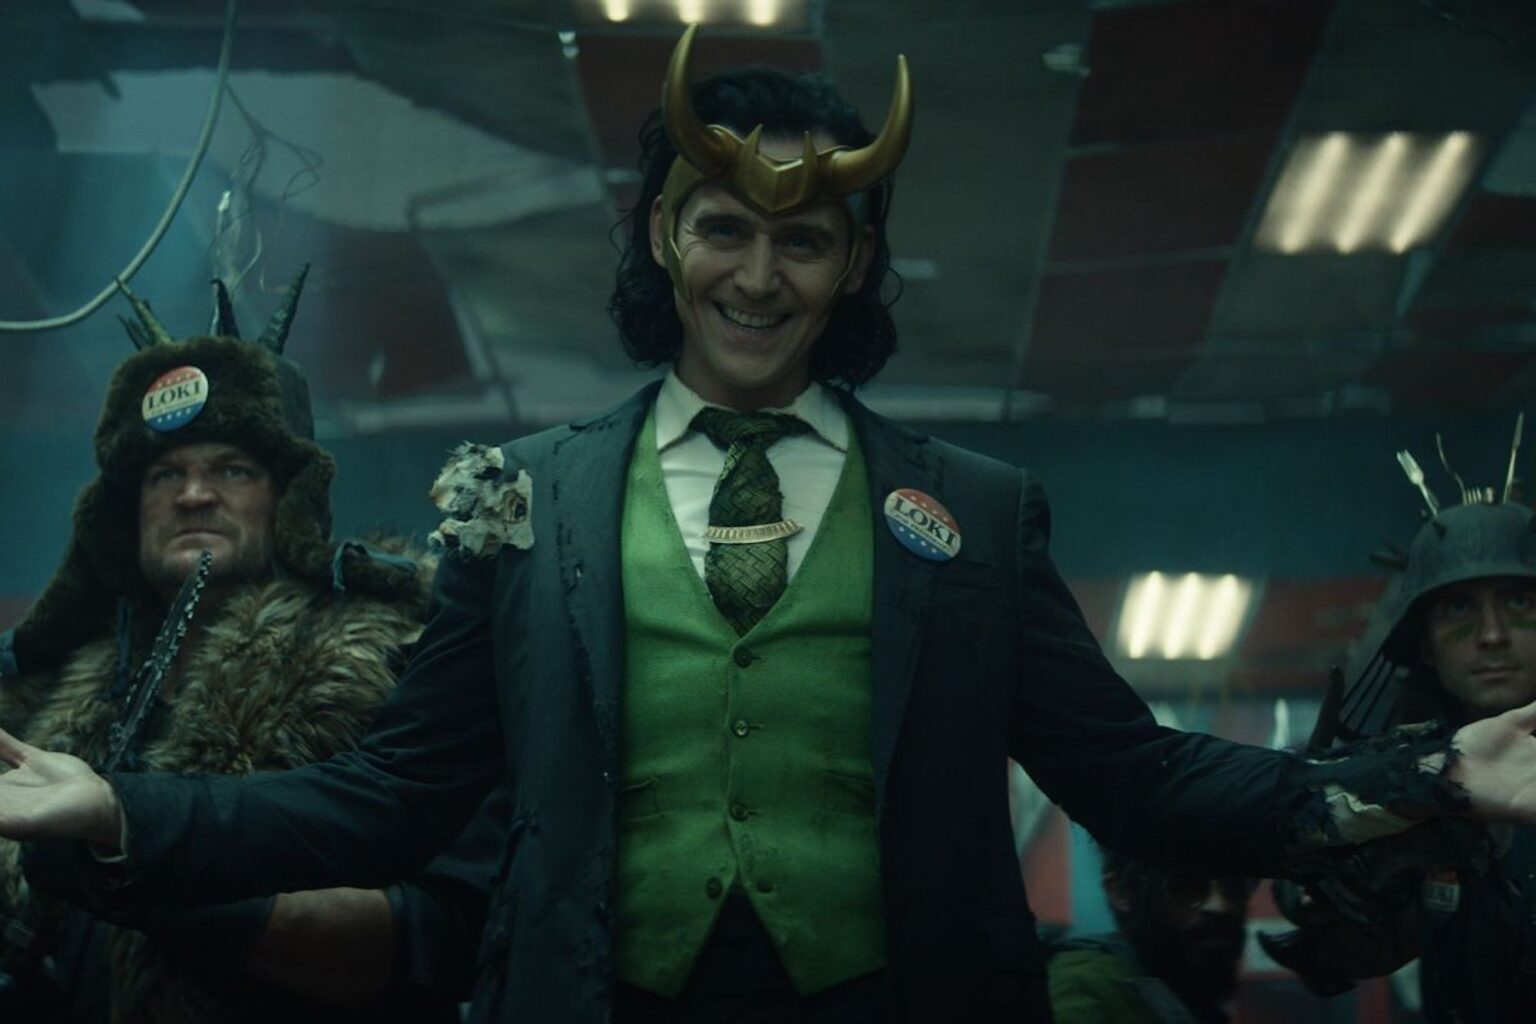 Ready to see Tom Hiddleston return as Loki tomorrow? Watch Hiddleston in action as his adorable self with these tweets!